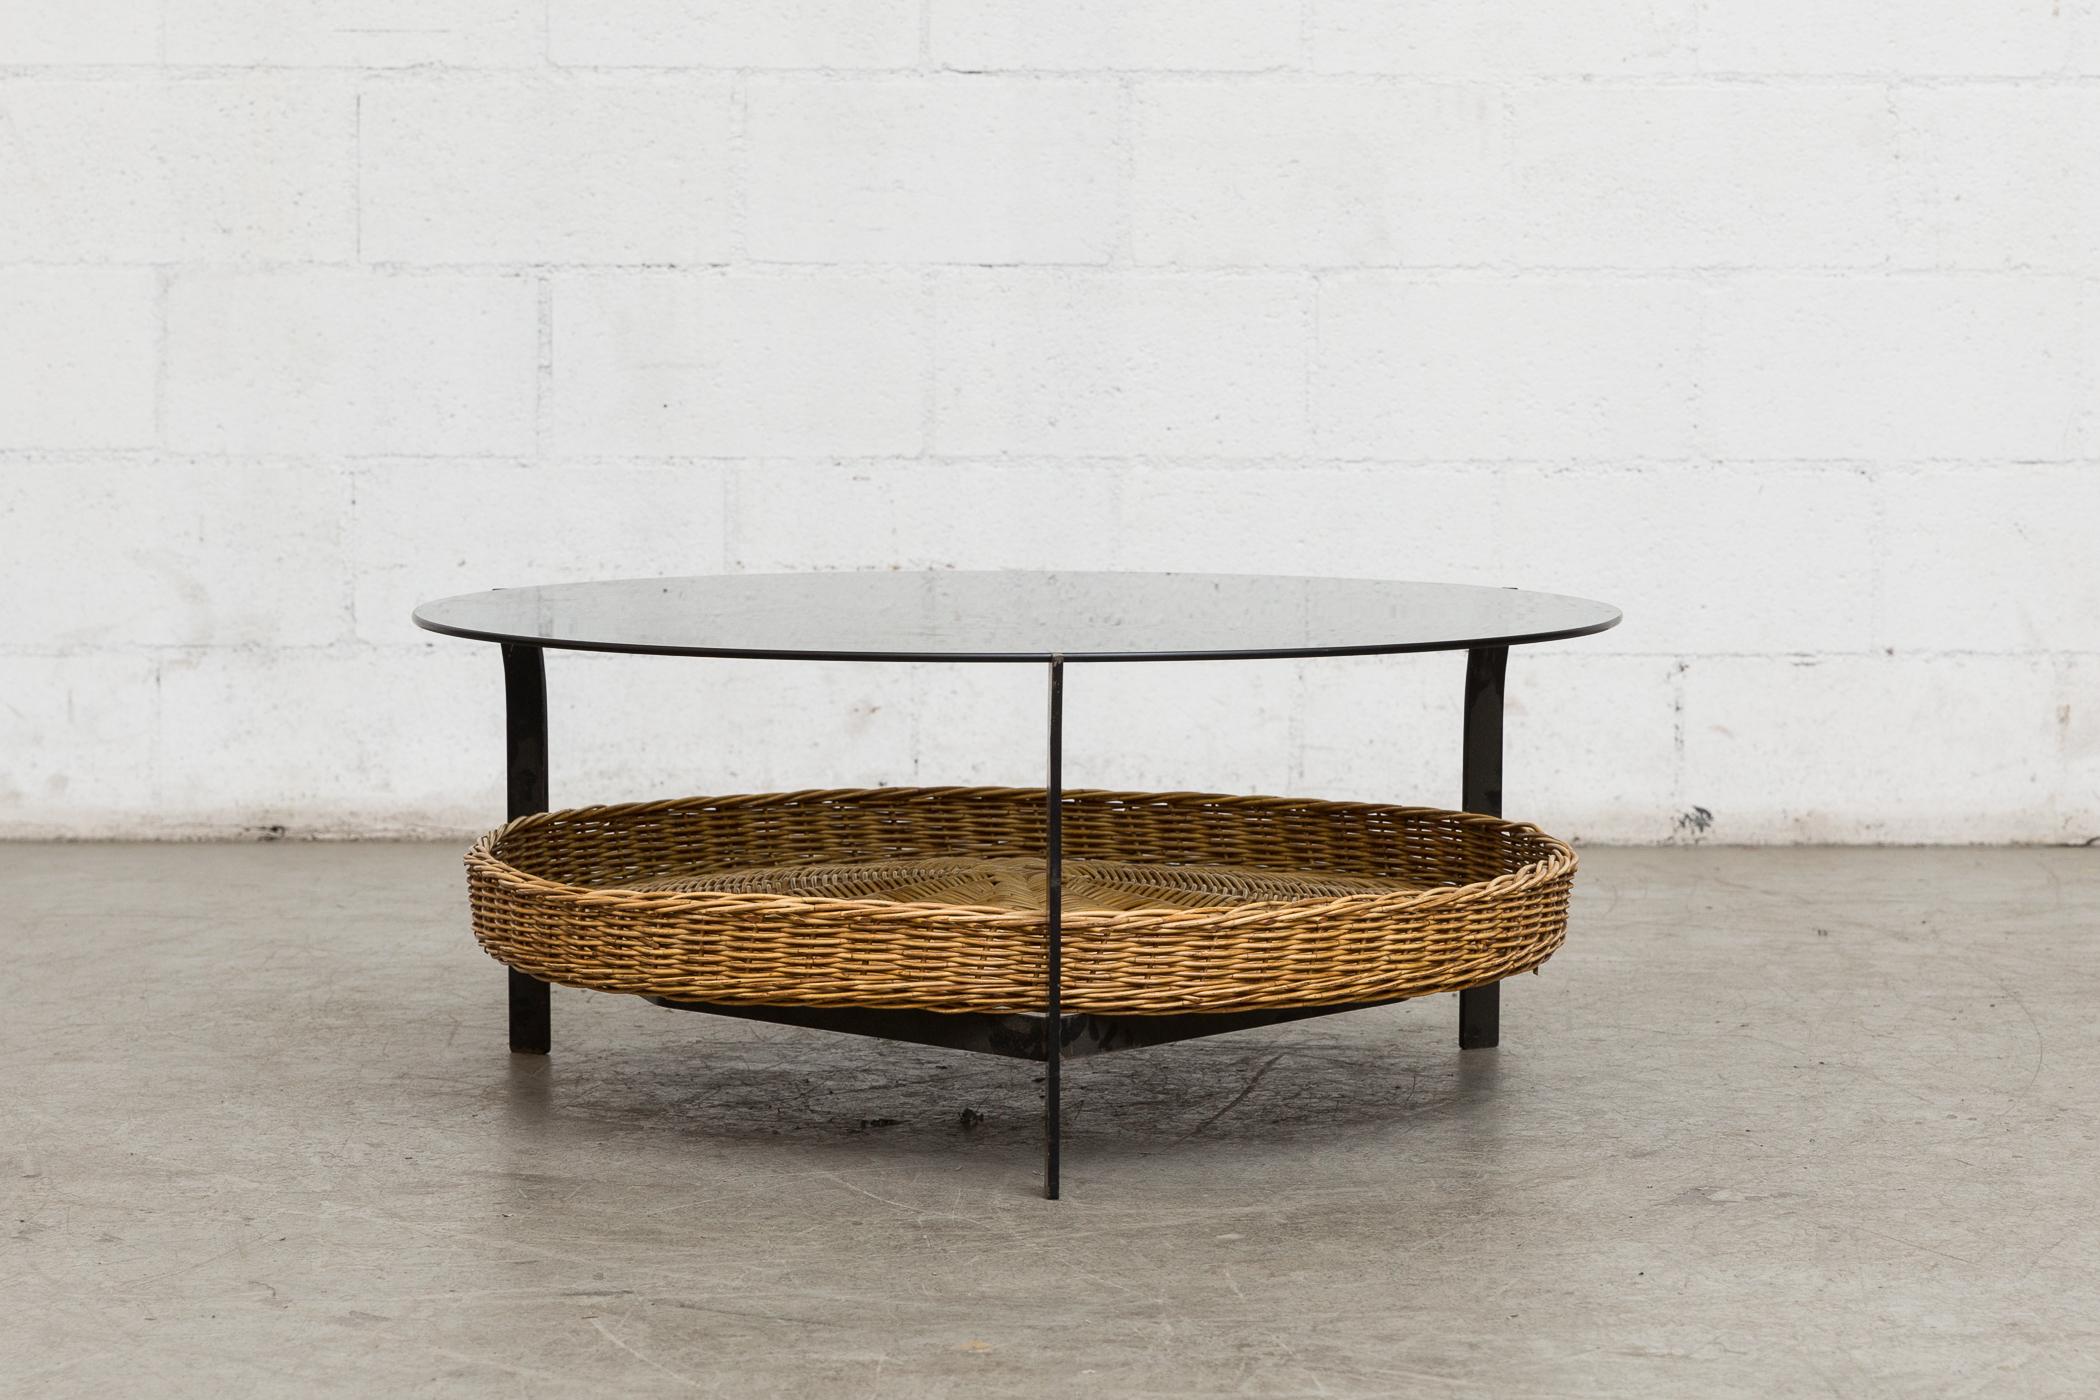 Midcentury round glass coffee table. With woven wicker lower basket black enameled metal frame with slightly turned out detail on metal frame and smoked plate glass. Original condition with visible wear consistent with its age and usage.